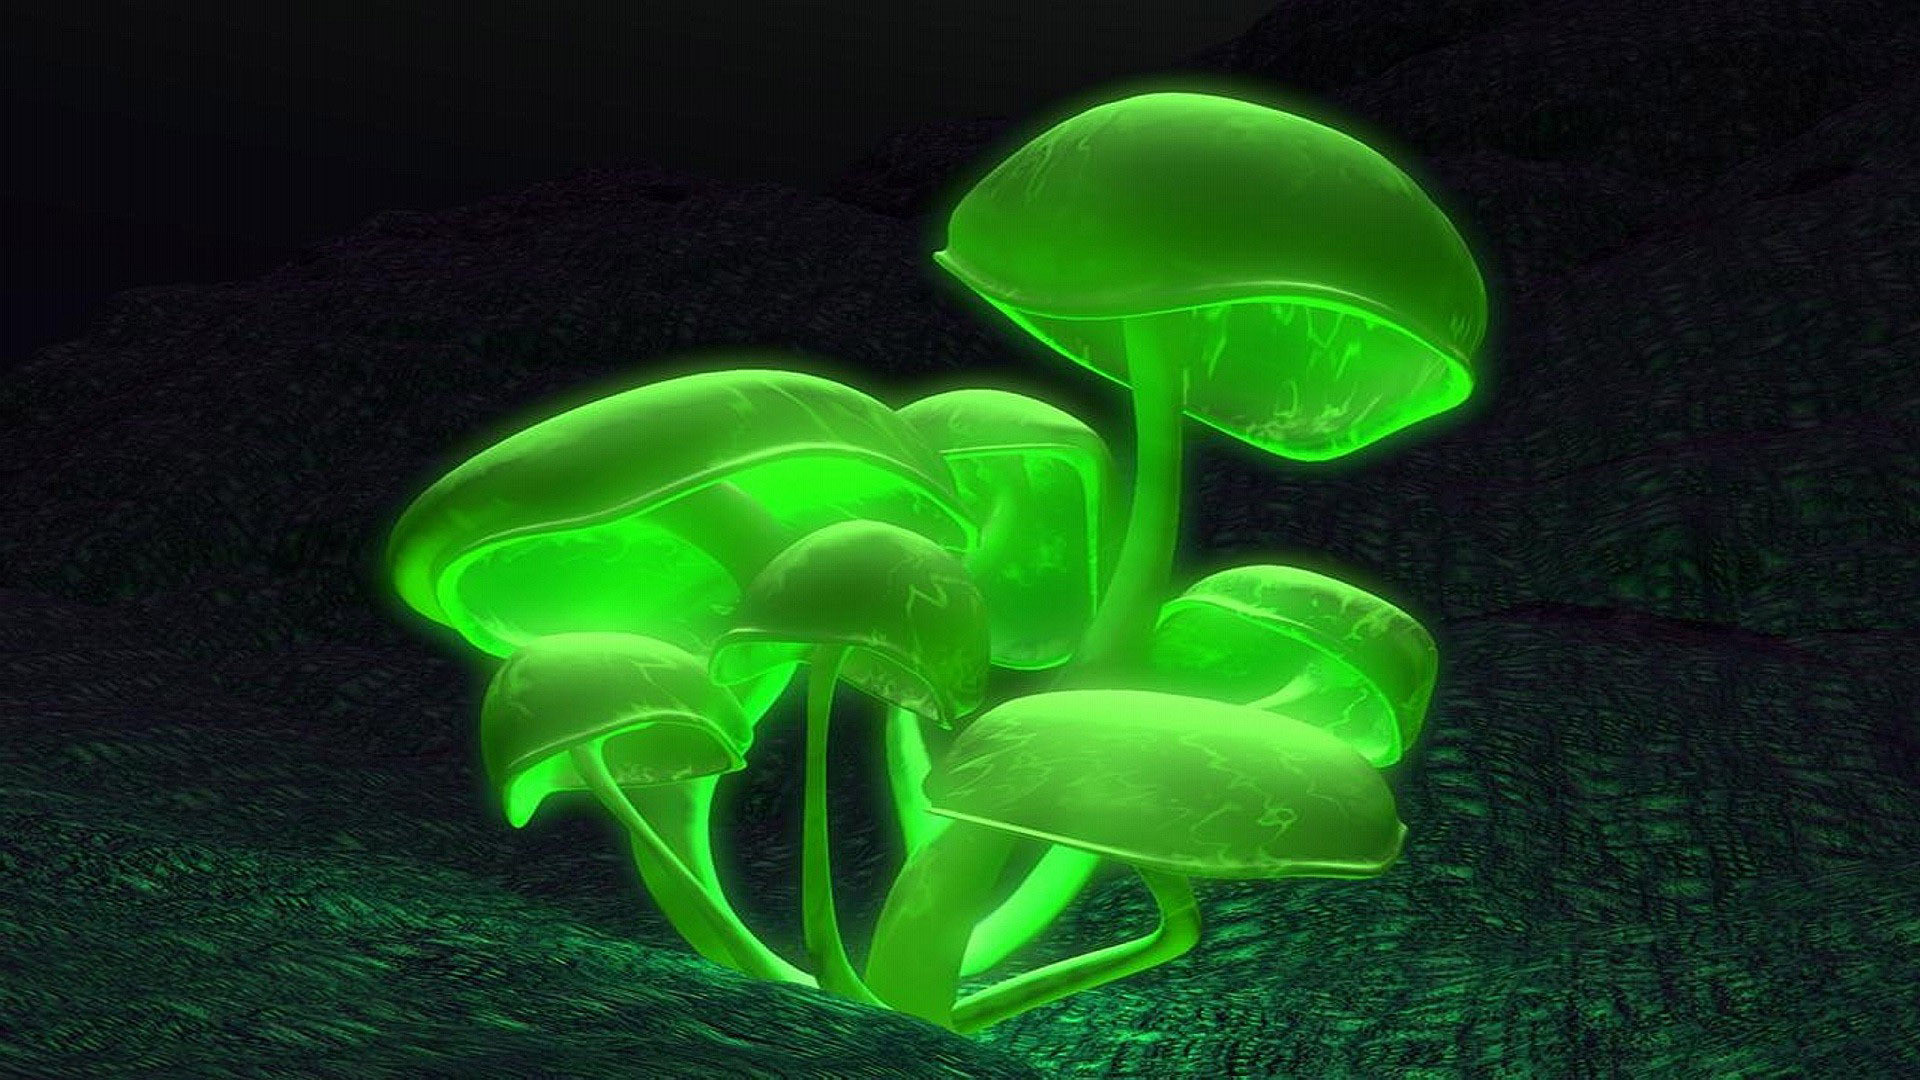 1920x1080 Neon Mushroom Wallpaper Images & Pictures - Becuo